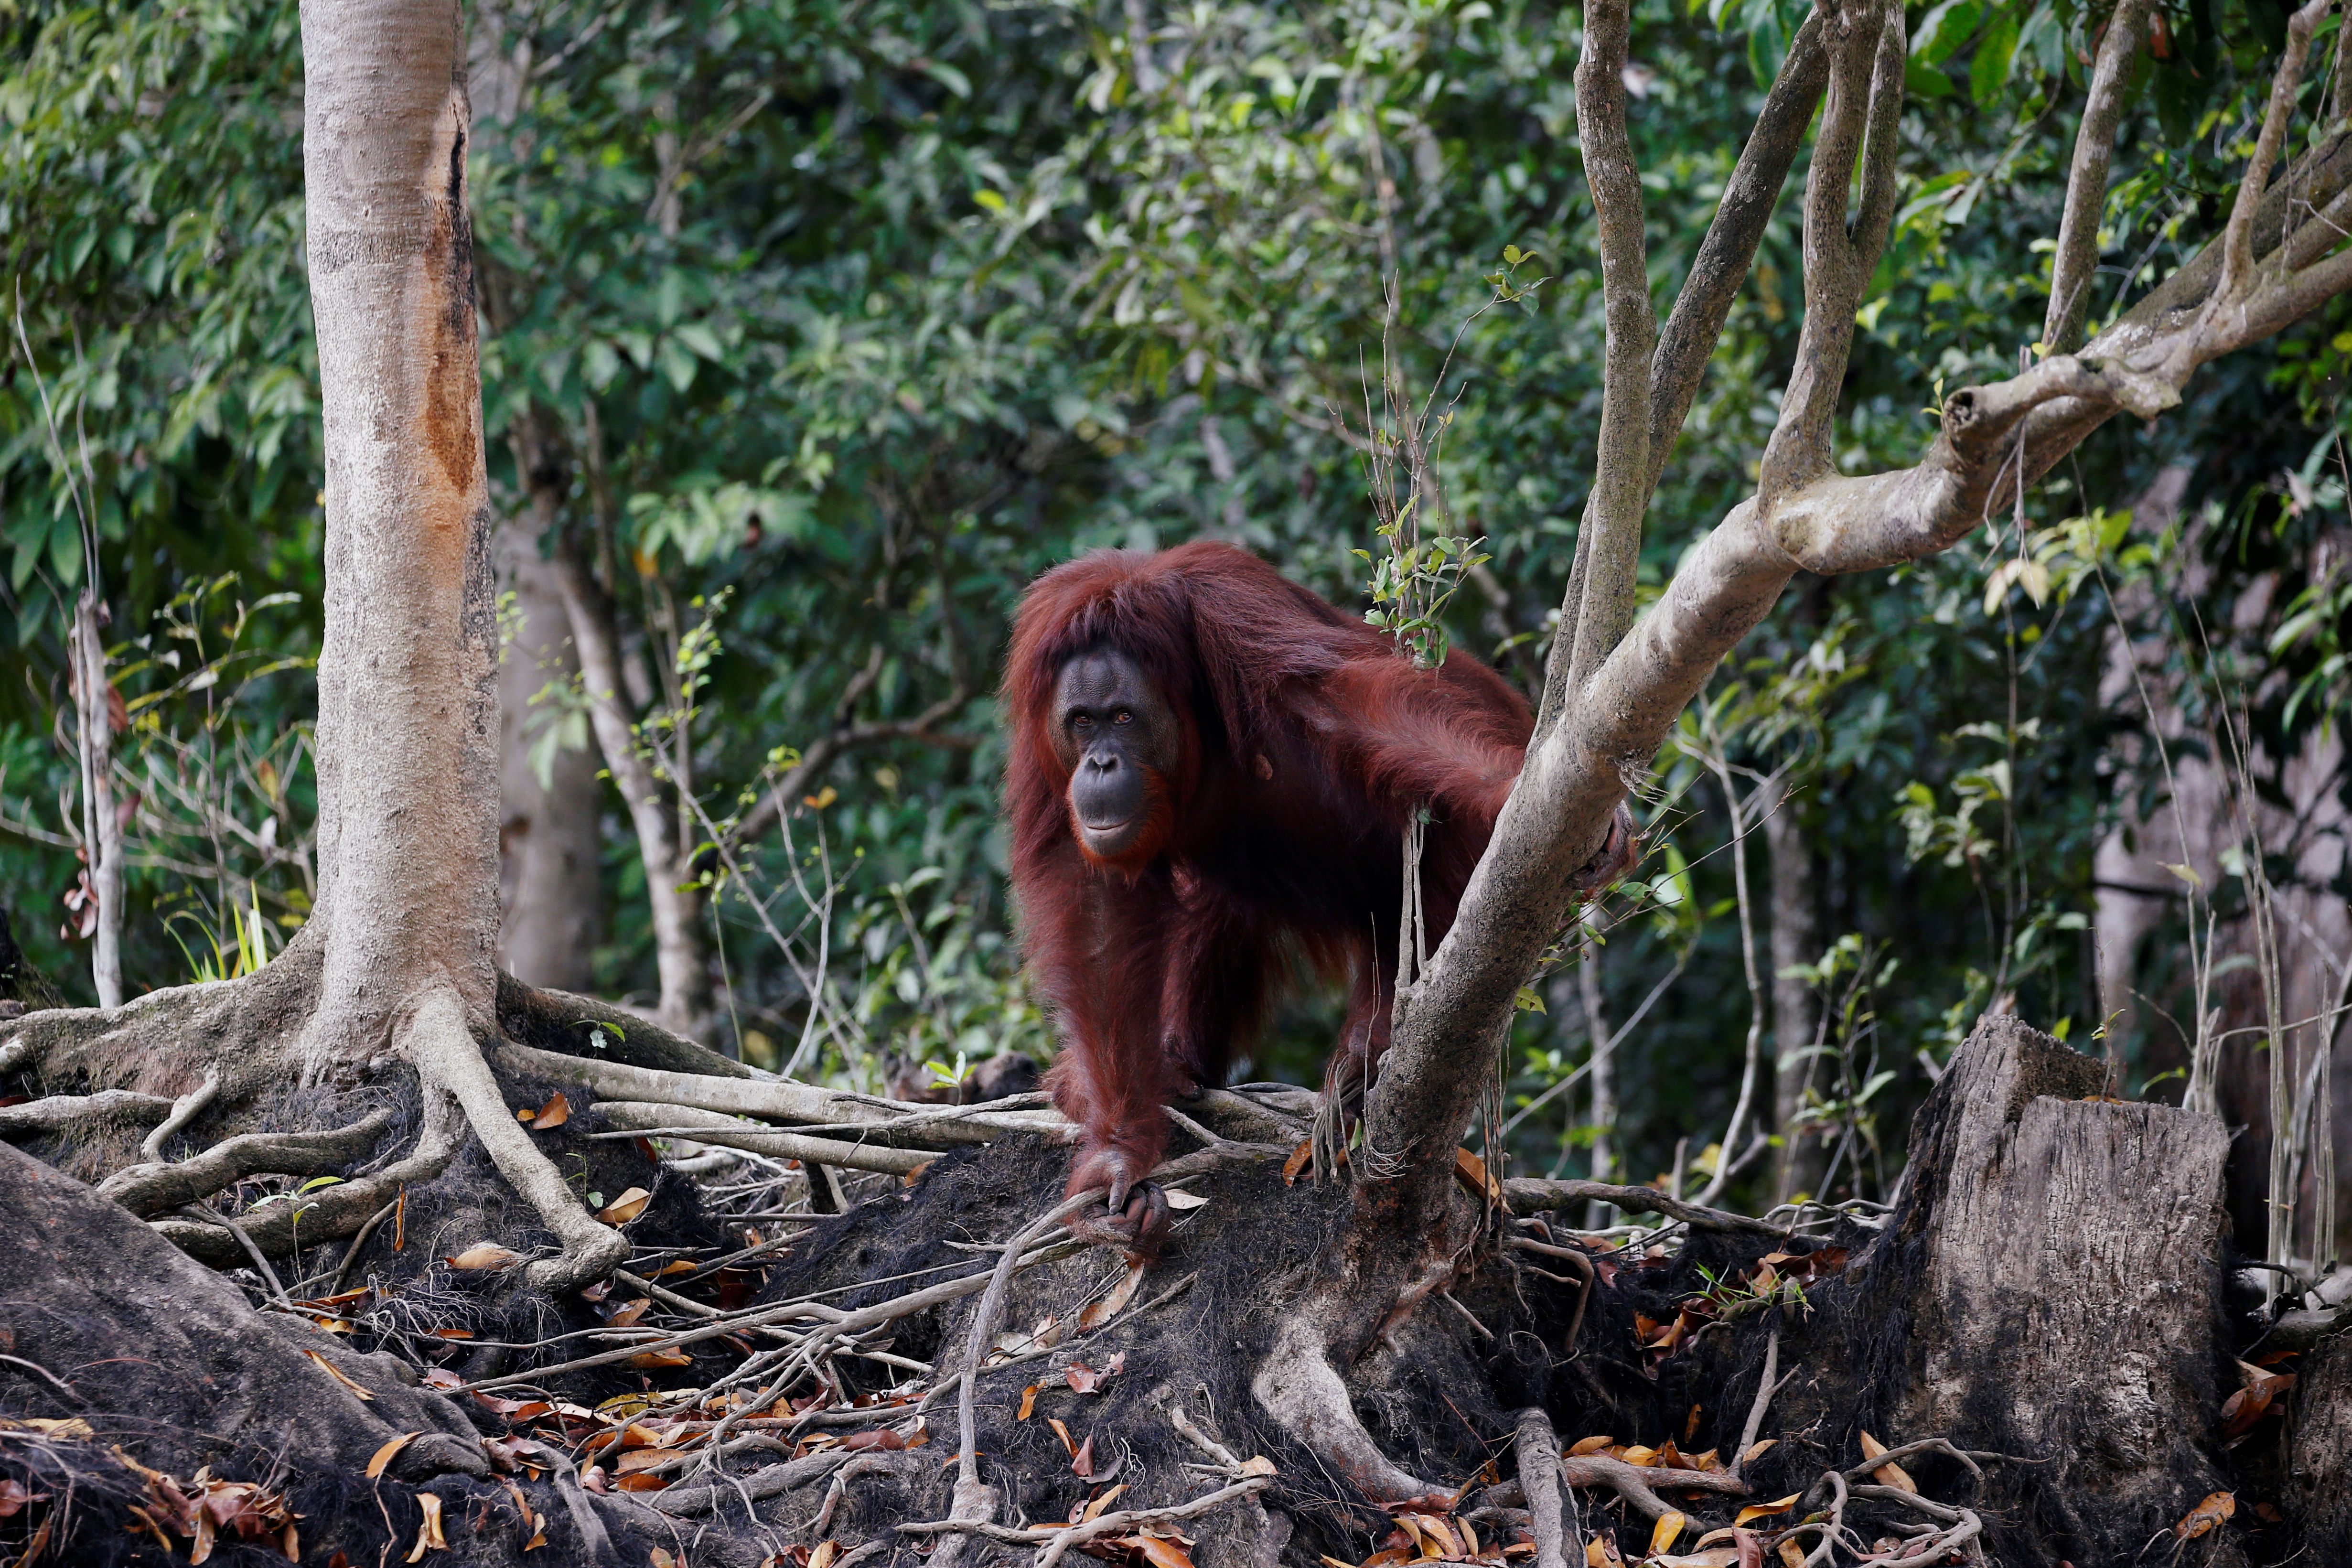 An orangutan is pictured in Central Kalimanta province, Indonesia.